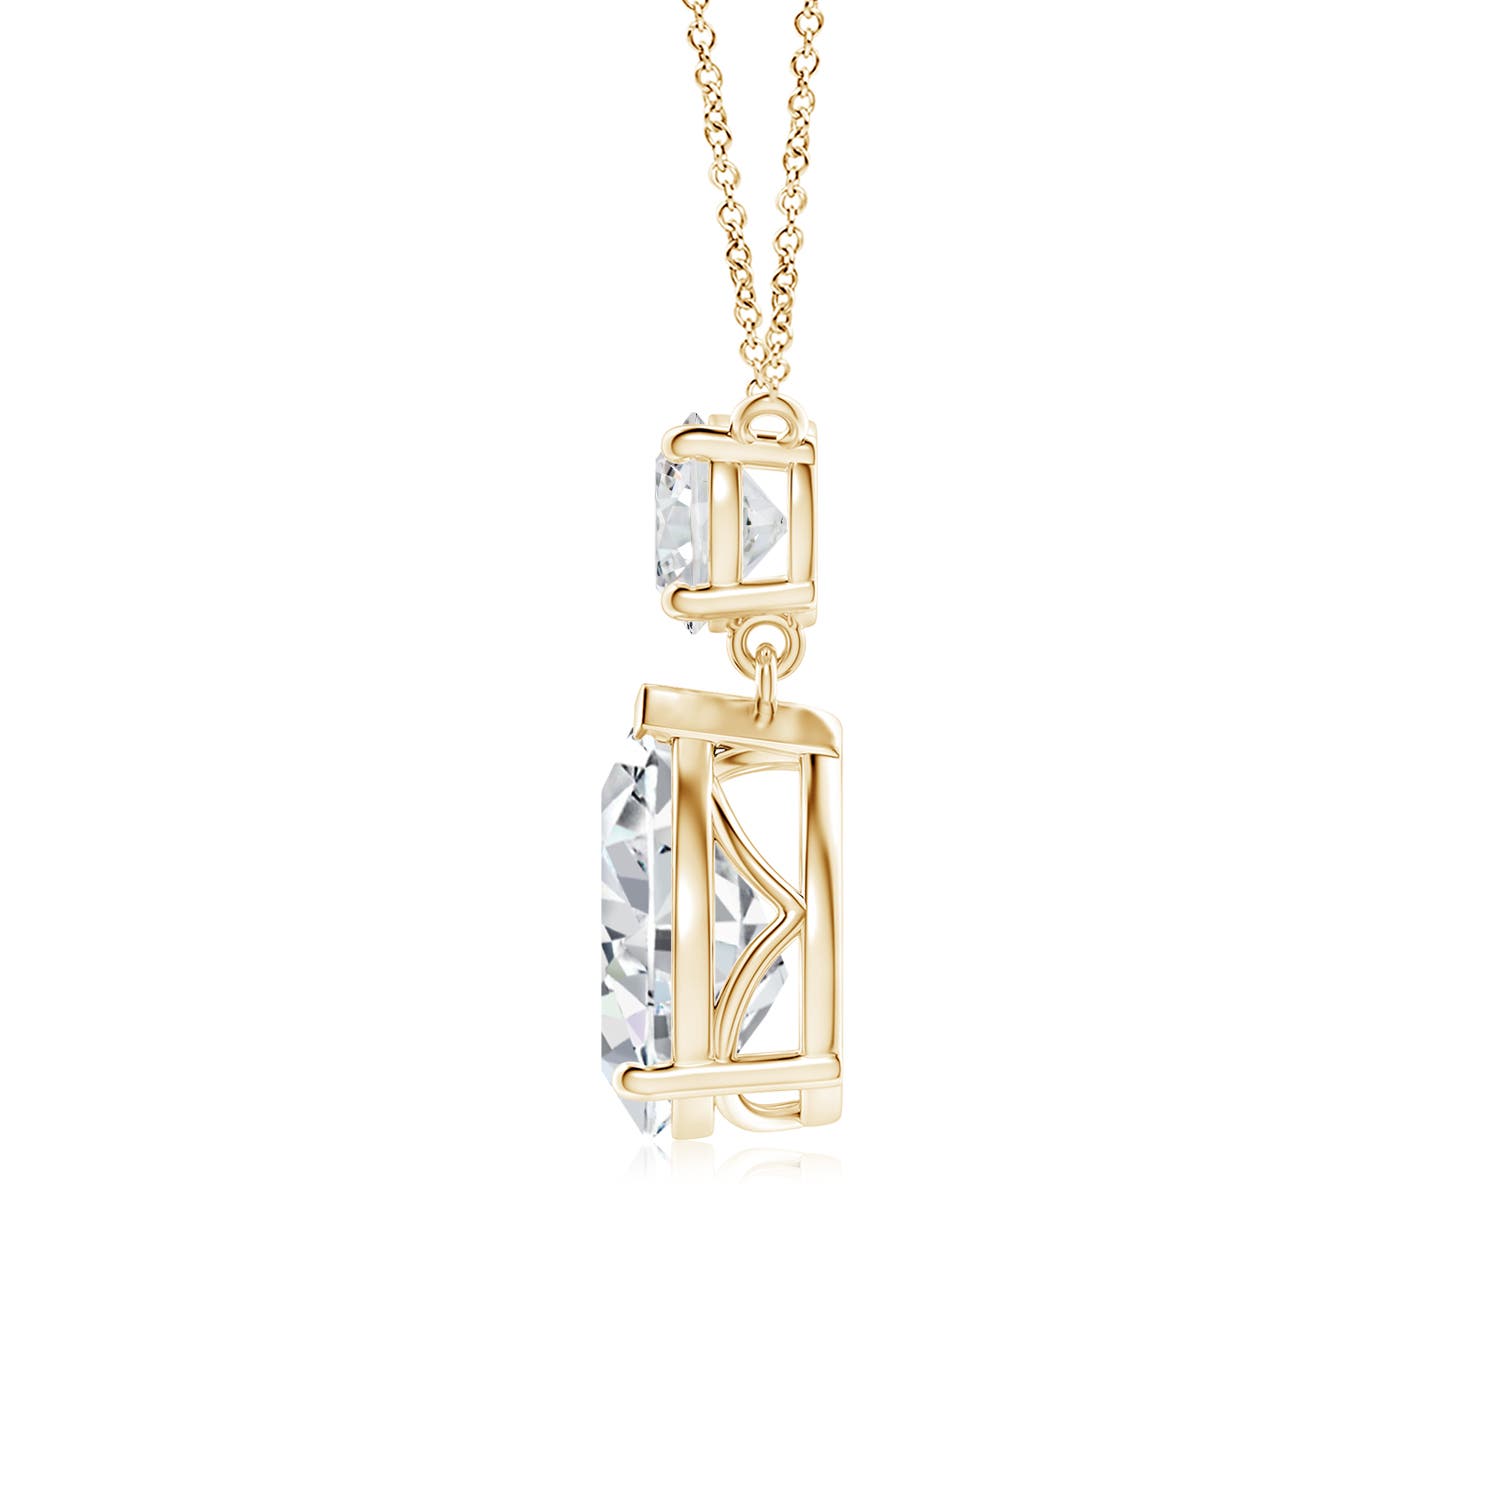 H, SI2 / 2.5 CT / 18 KT Yellow Gold